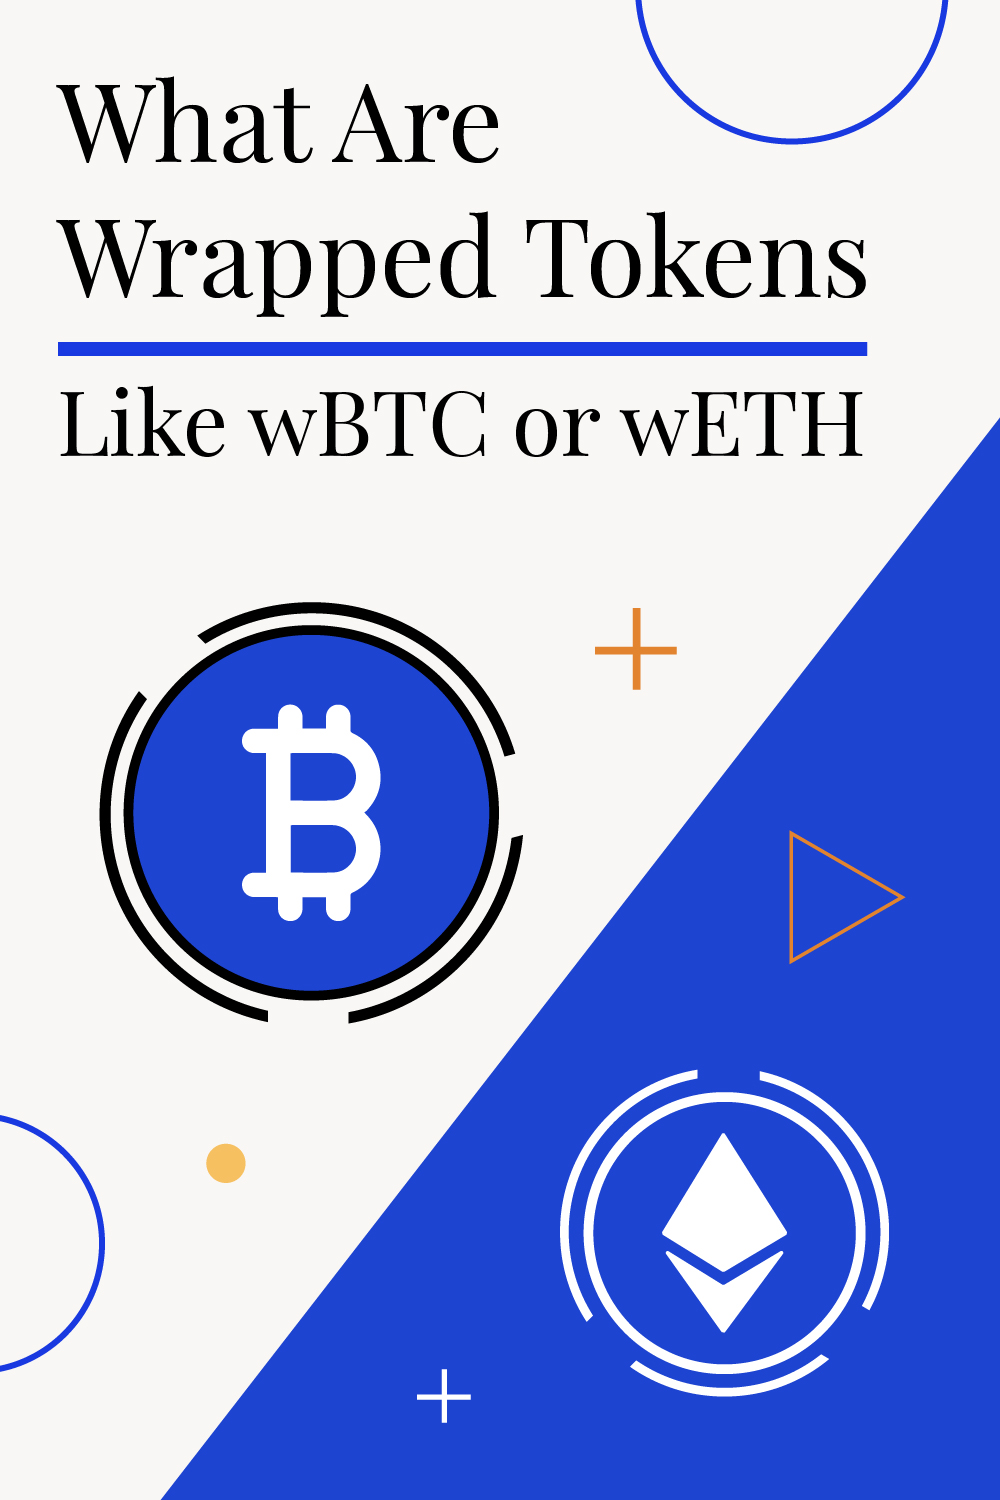 What Are Wrapped Tokens Like WBTC Or WETH?